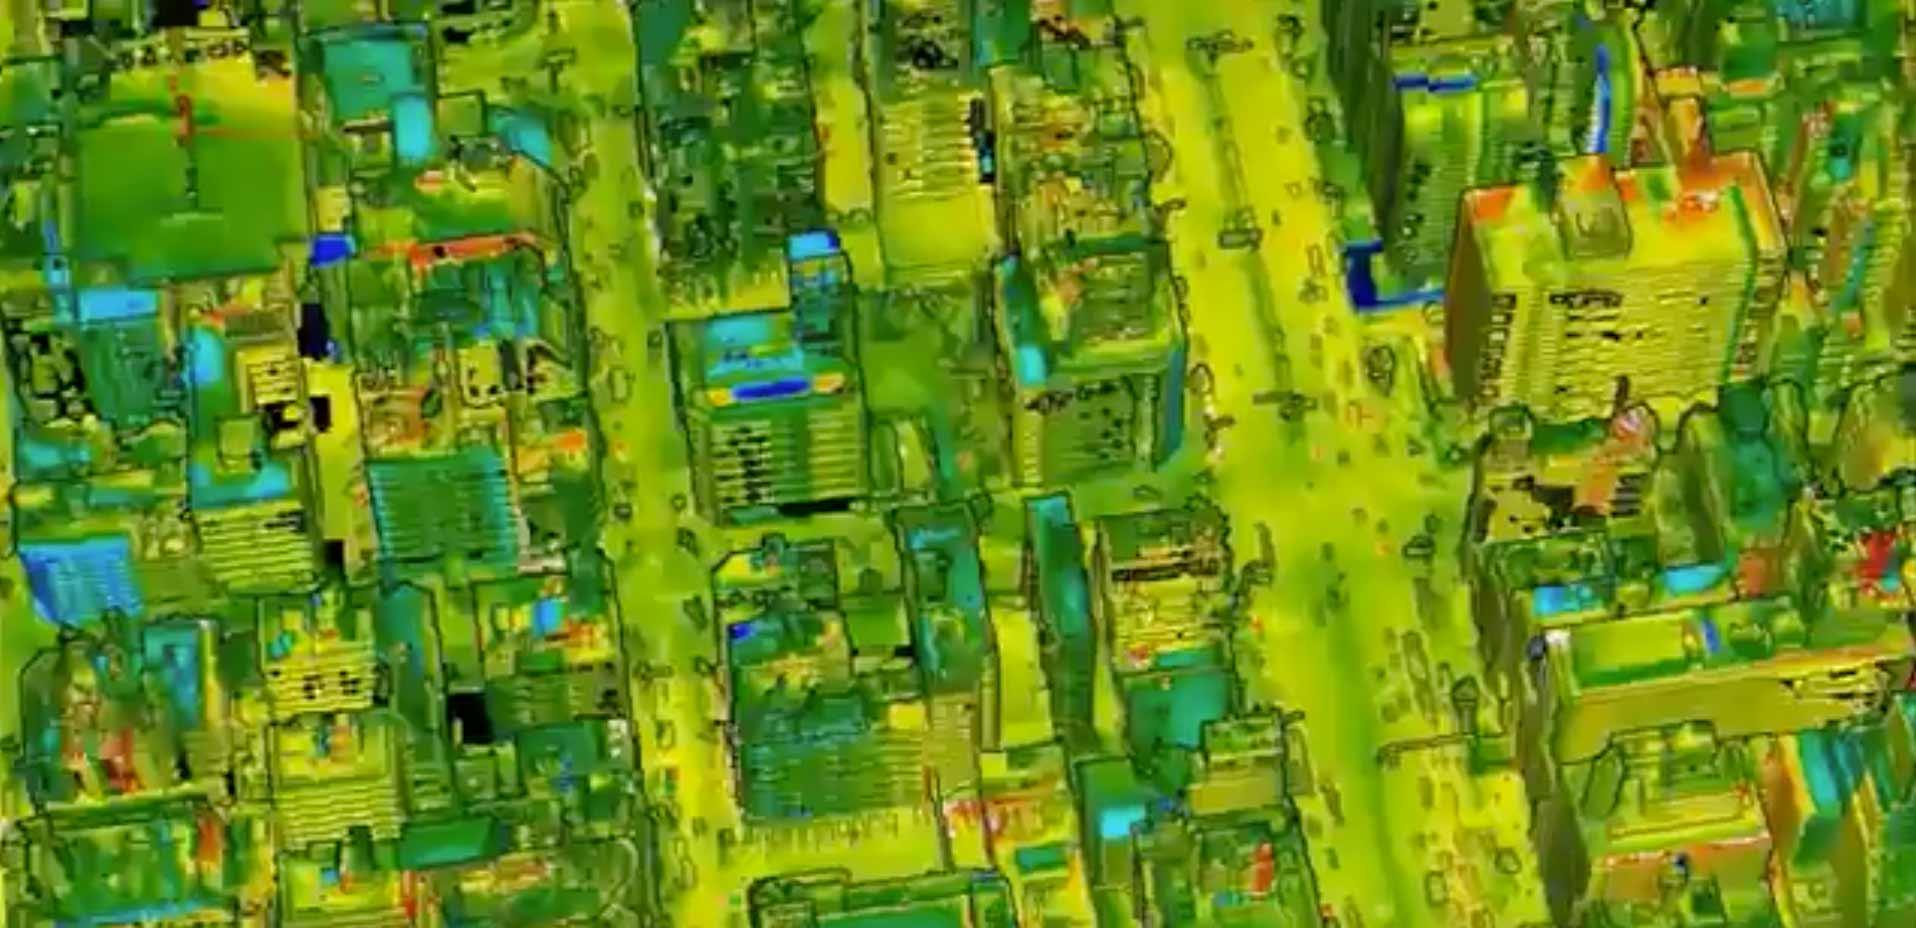 Product High Resolution and Accurate Thermal Mapping Image with Lidar Data - ITRES Research Limited image